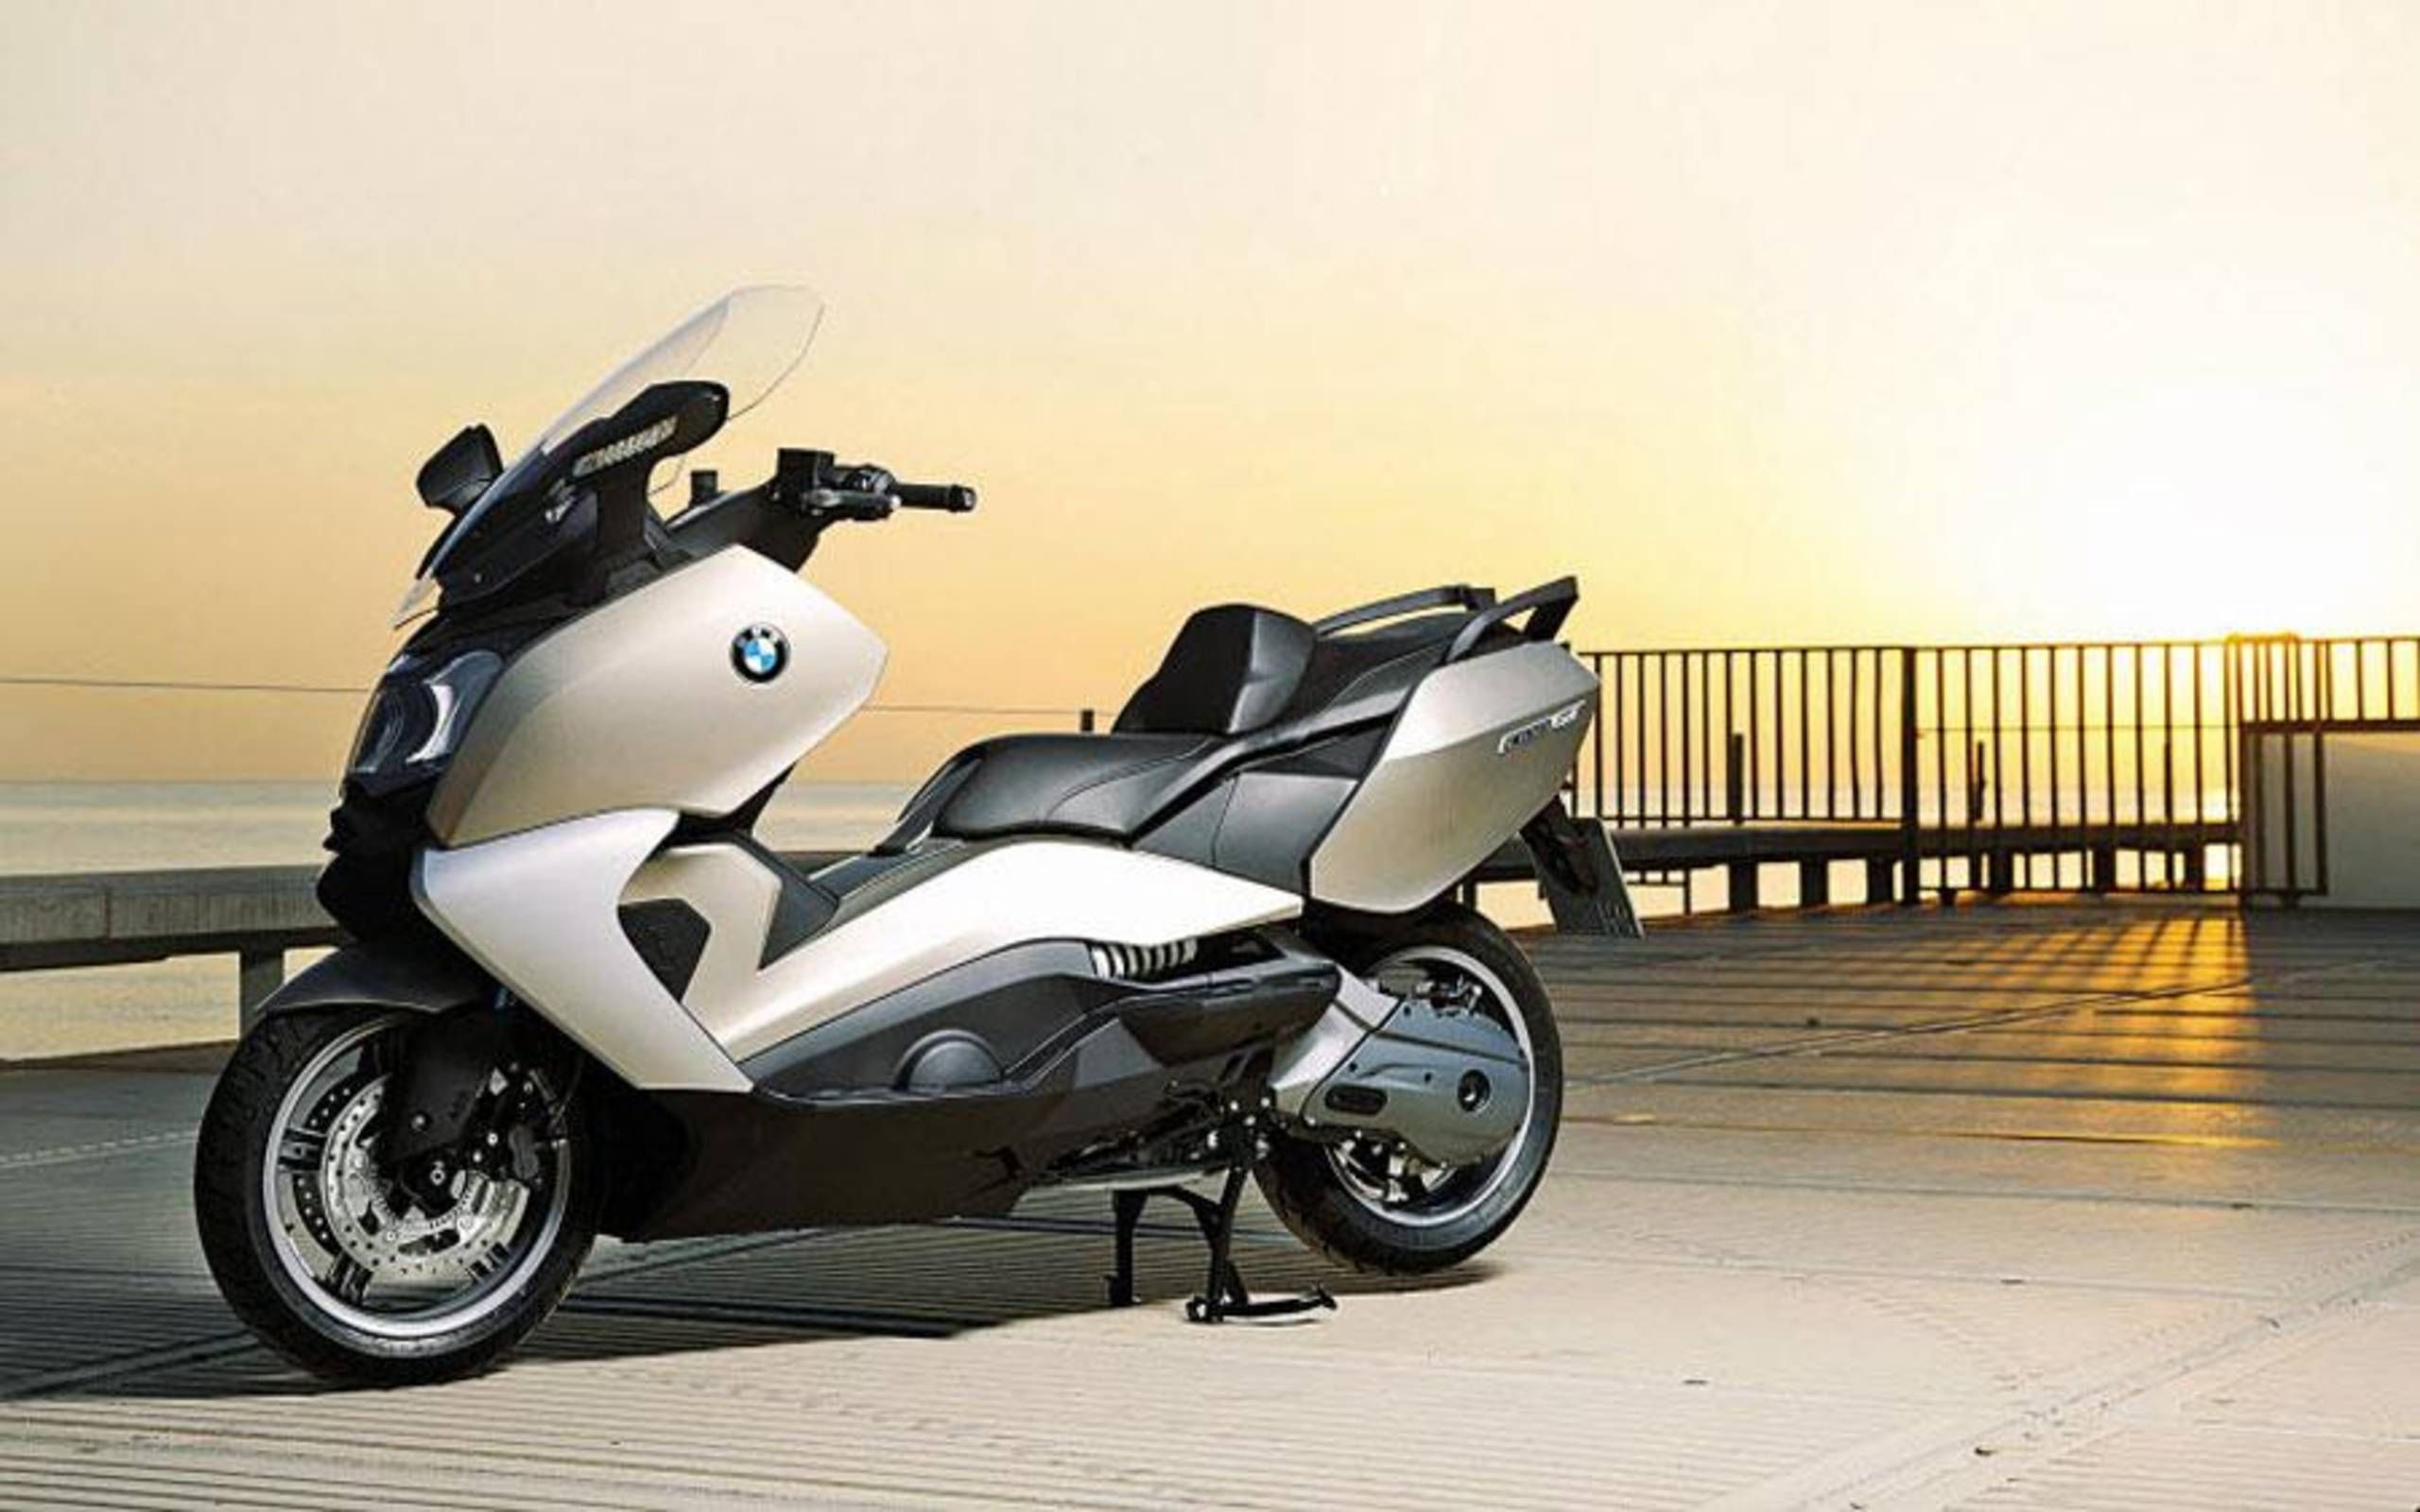 Bmw c 650. BMW c650gt. BMW c600 Sport and c650gt. BMW максискутер 650. BMW c650gt Specifications.